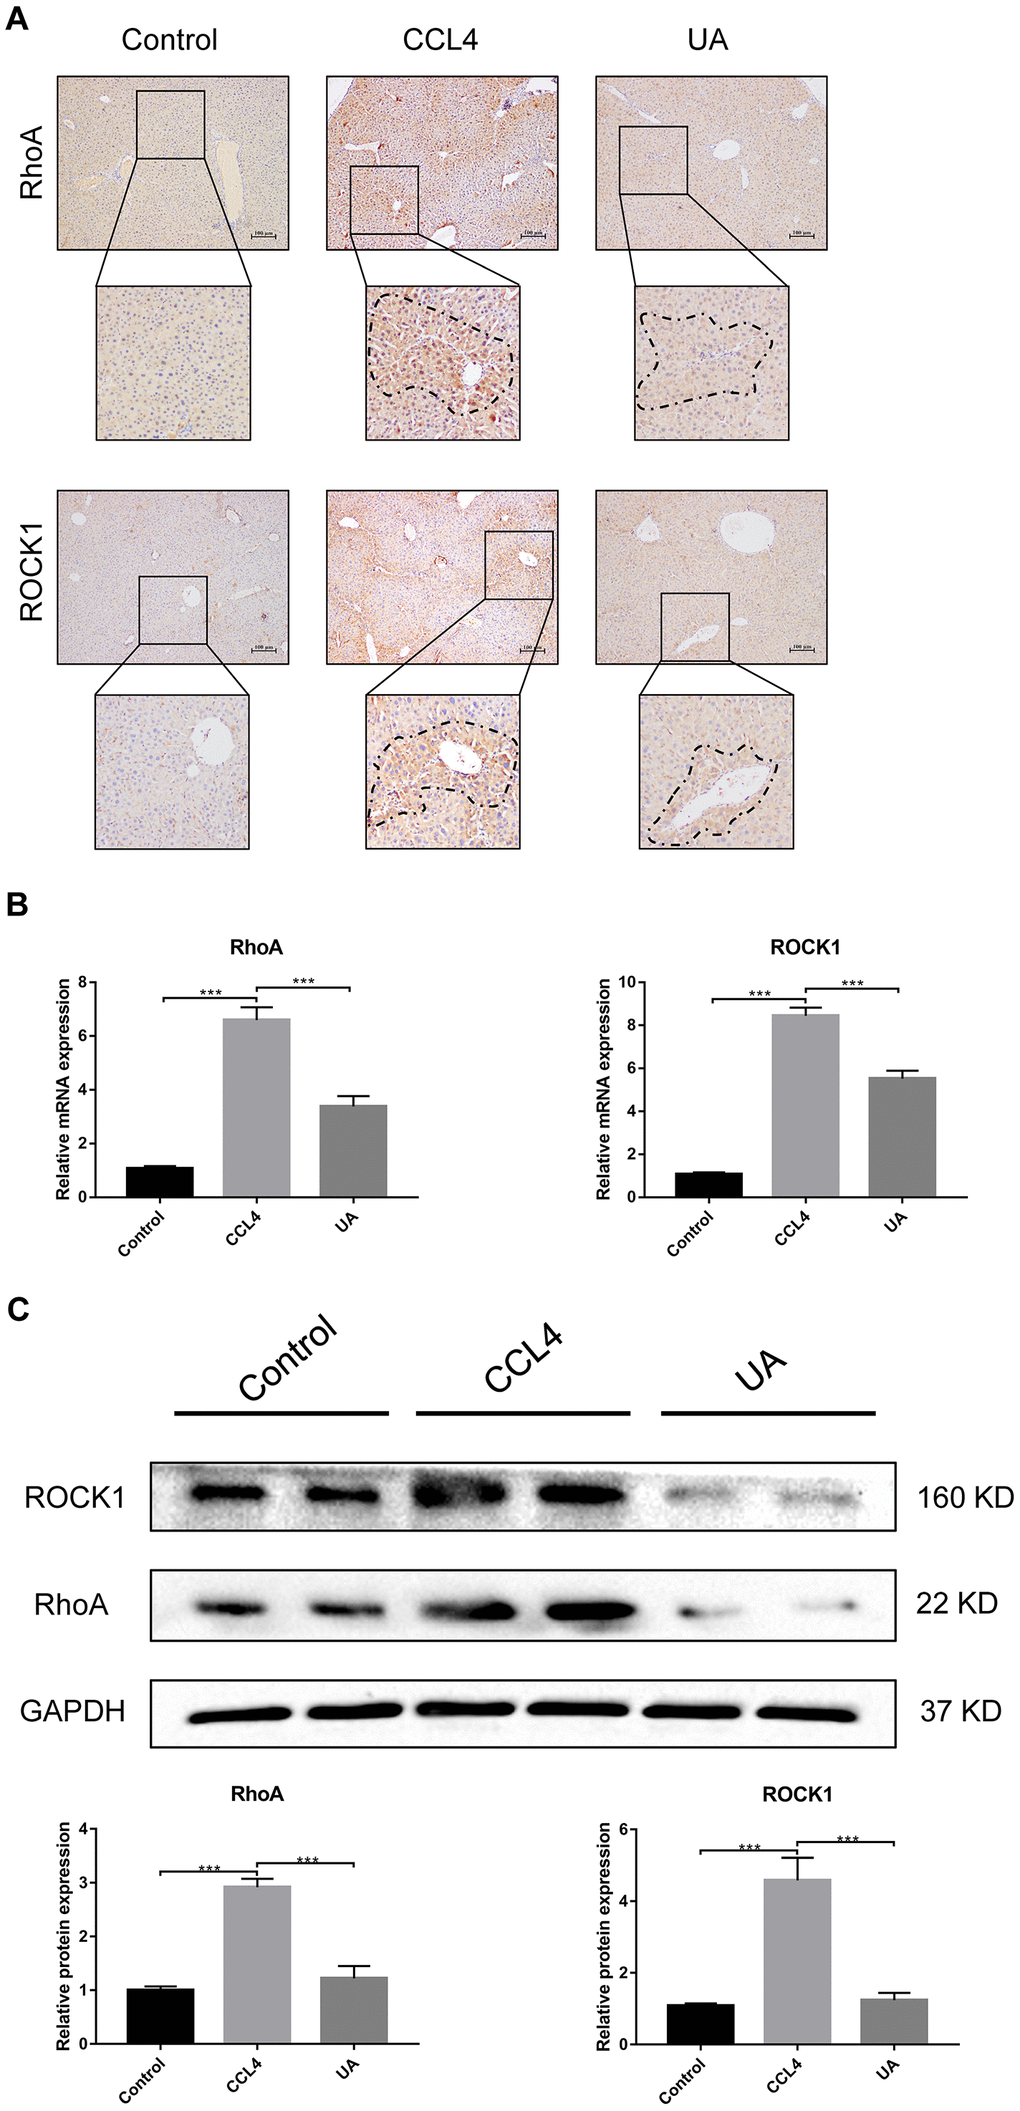 Effect of UA on the expression of RhoA/ROCK1 in liver fibrotic mice. (A) The effect of UA on RhoA/ROCK1 expression was determined by using IHC. (B) Hepatic mRNA levels of RhoA/ROCK1 were measured by qRT-PCR. (C) Hepatic protein levels of RhoA/ ROCK1 were detected by a western blot. Data represent the mean ± SD of each group. *P 